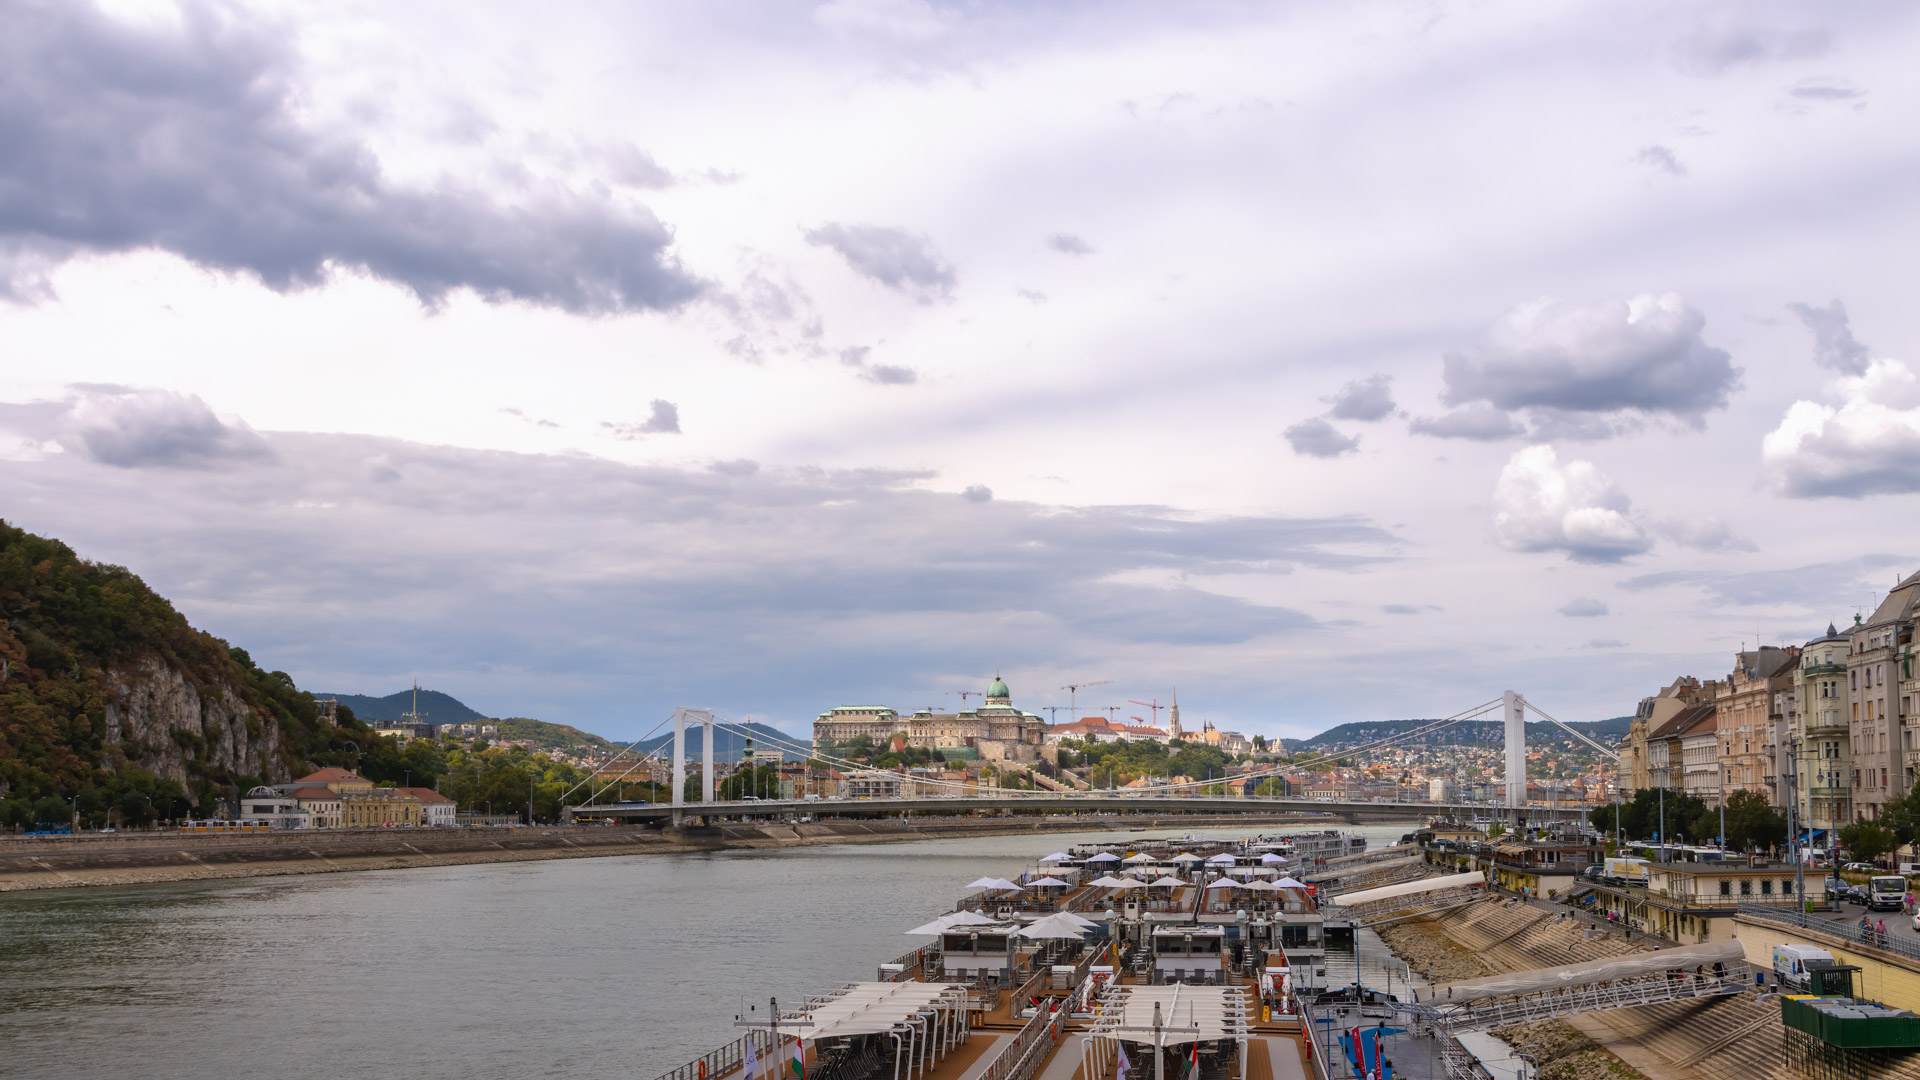 Download this stunning Budapest cityscape wallpaper in high definition (HD) for your desktop or mobile device. This wallpaper features the beautiful architecture and scenery of Budapest, including the famous Chain Bridge and Parliament building.